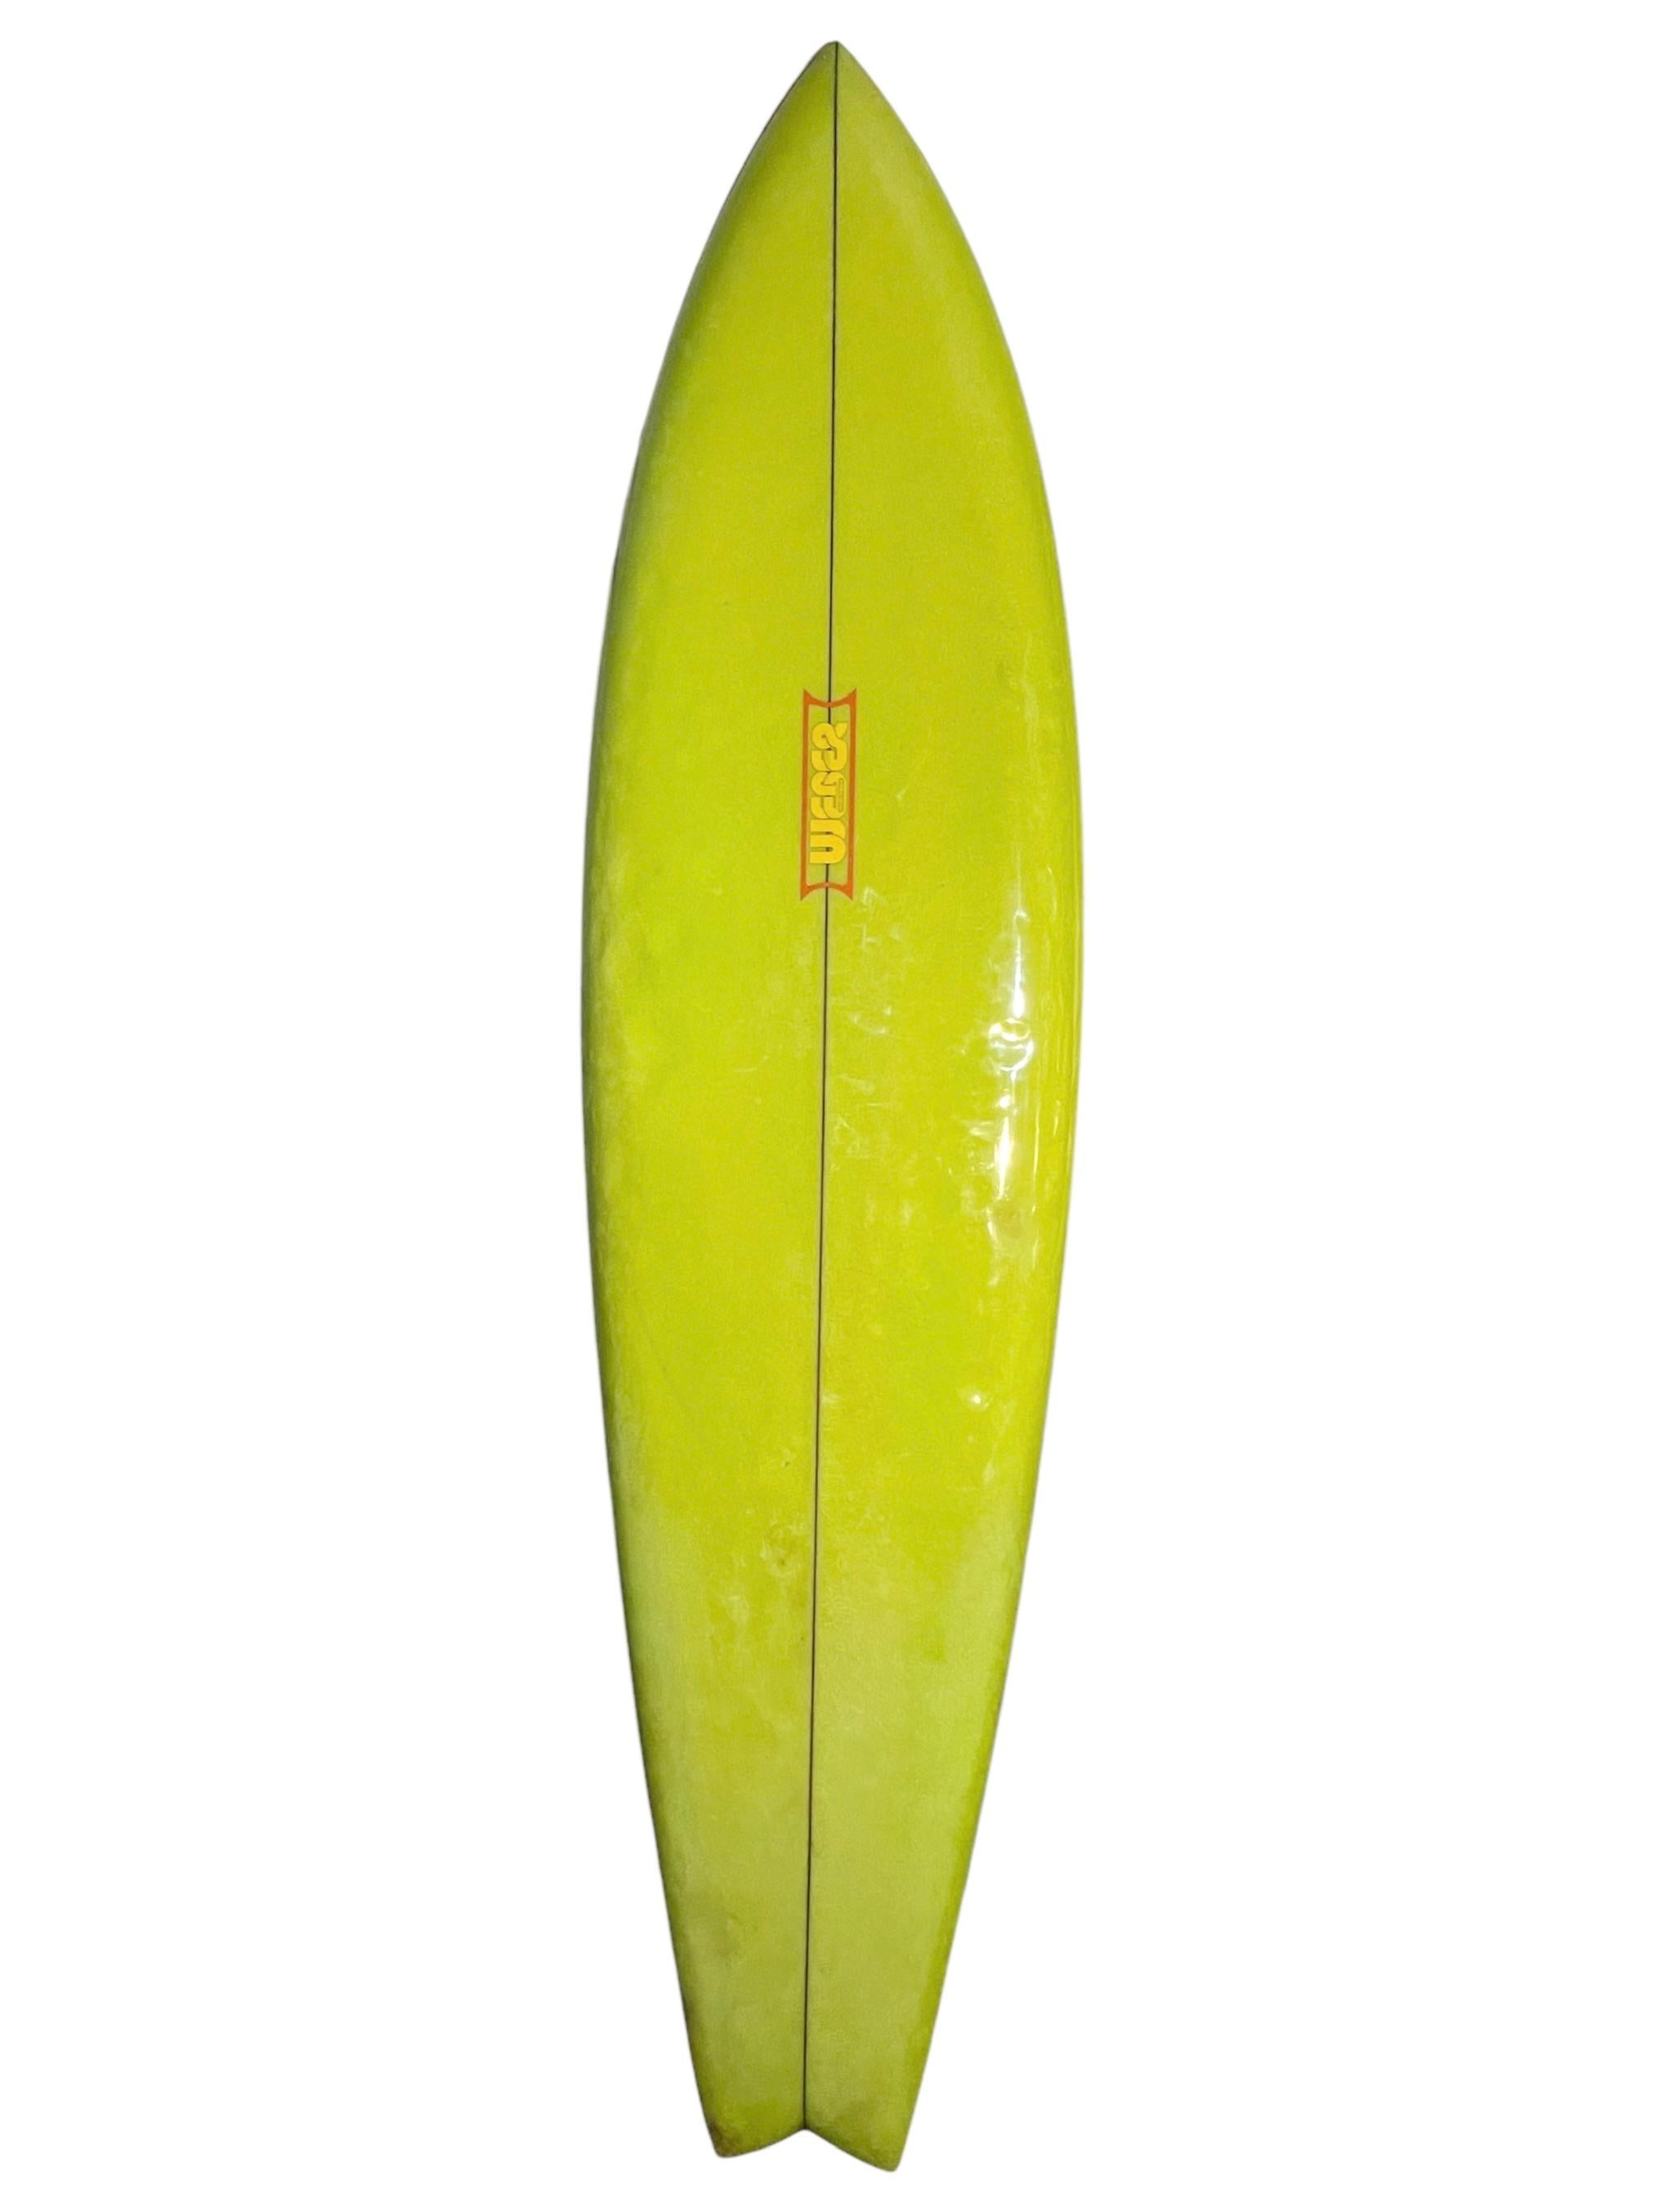 Vintage 1970s Dewey Weber wave mural surfboard. Features beautiful airbrushed full length wave mural on the deck with greenish yellow tinted rails/bottom. Swallow tail shape design. A stunning example of an original 1970s airbrushed surfboard work